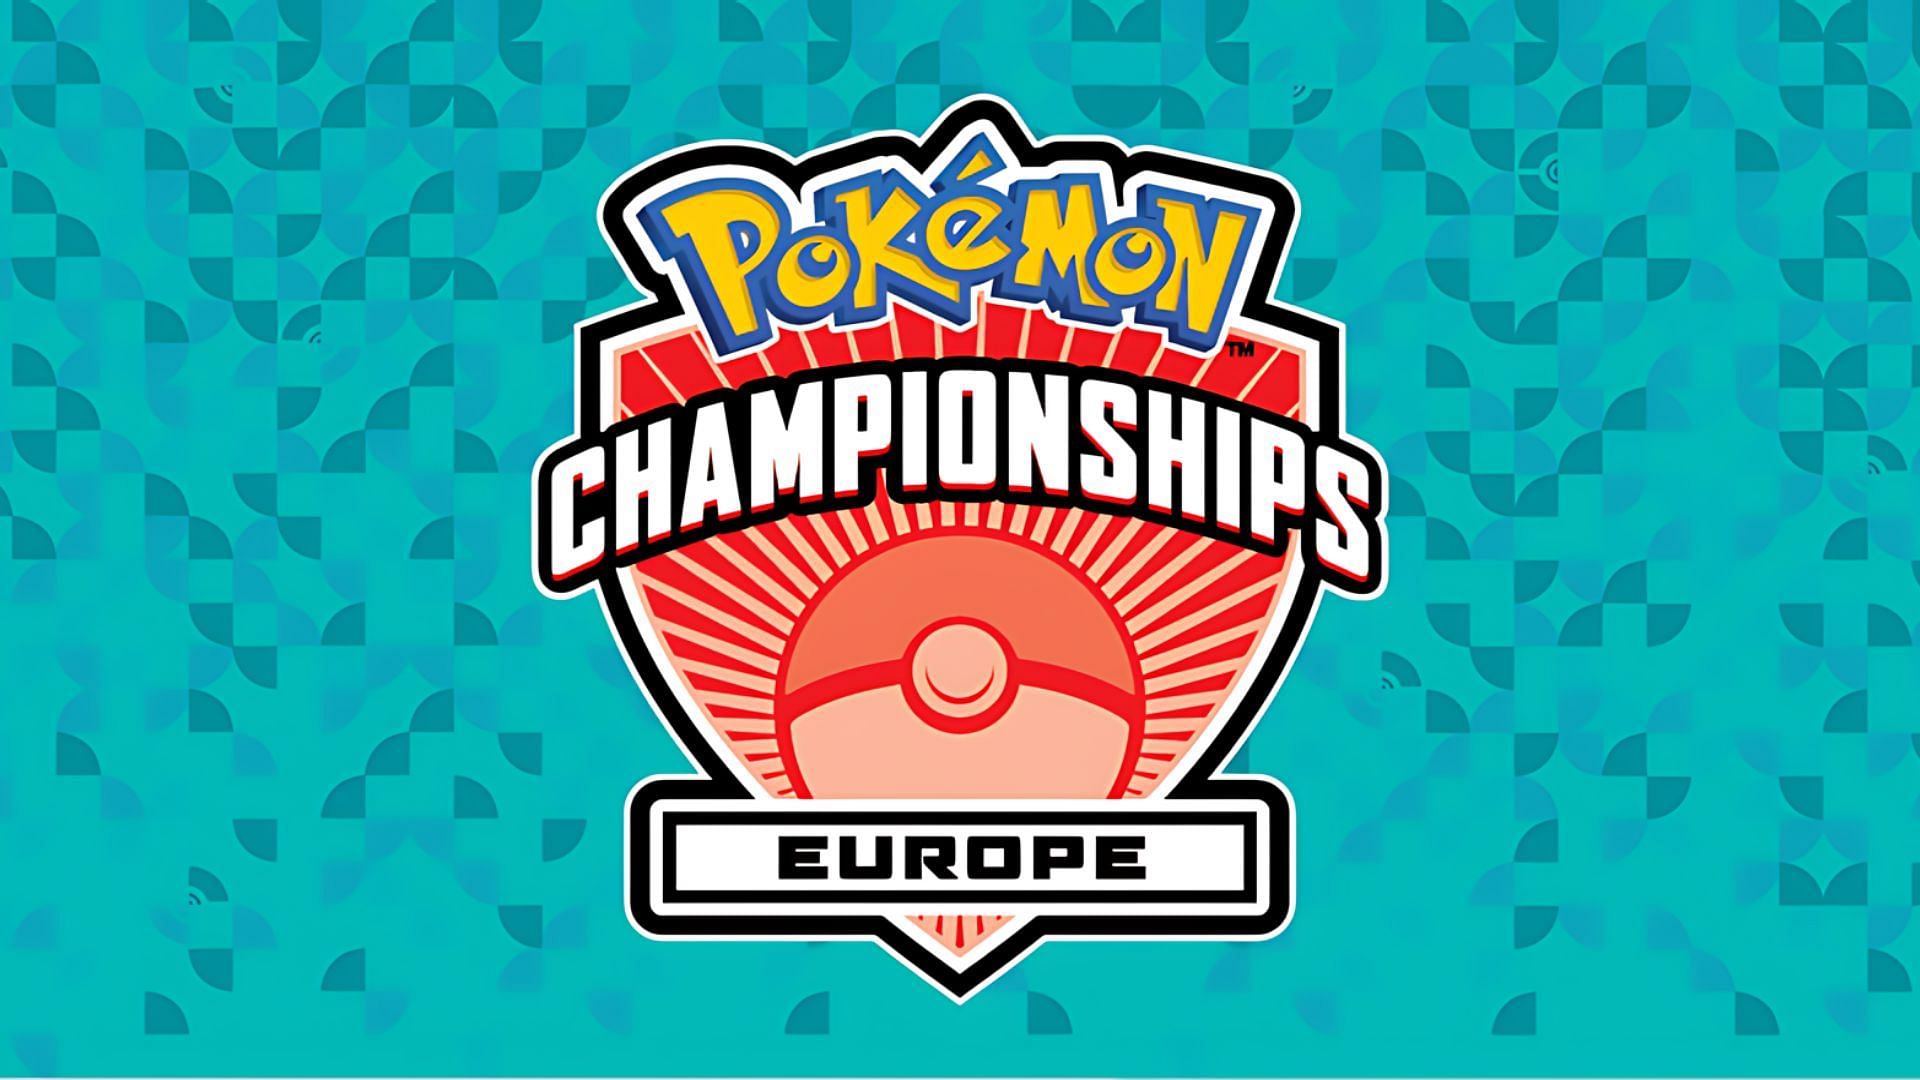 5 Pokemon GO players to watch out for at EUIC 24